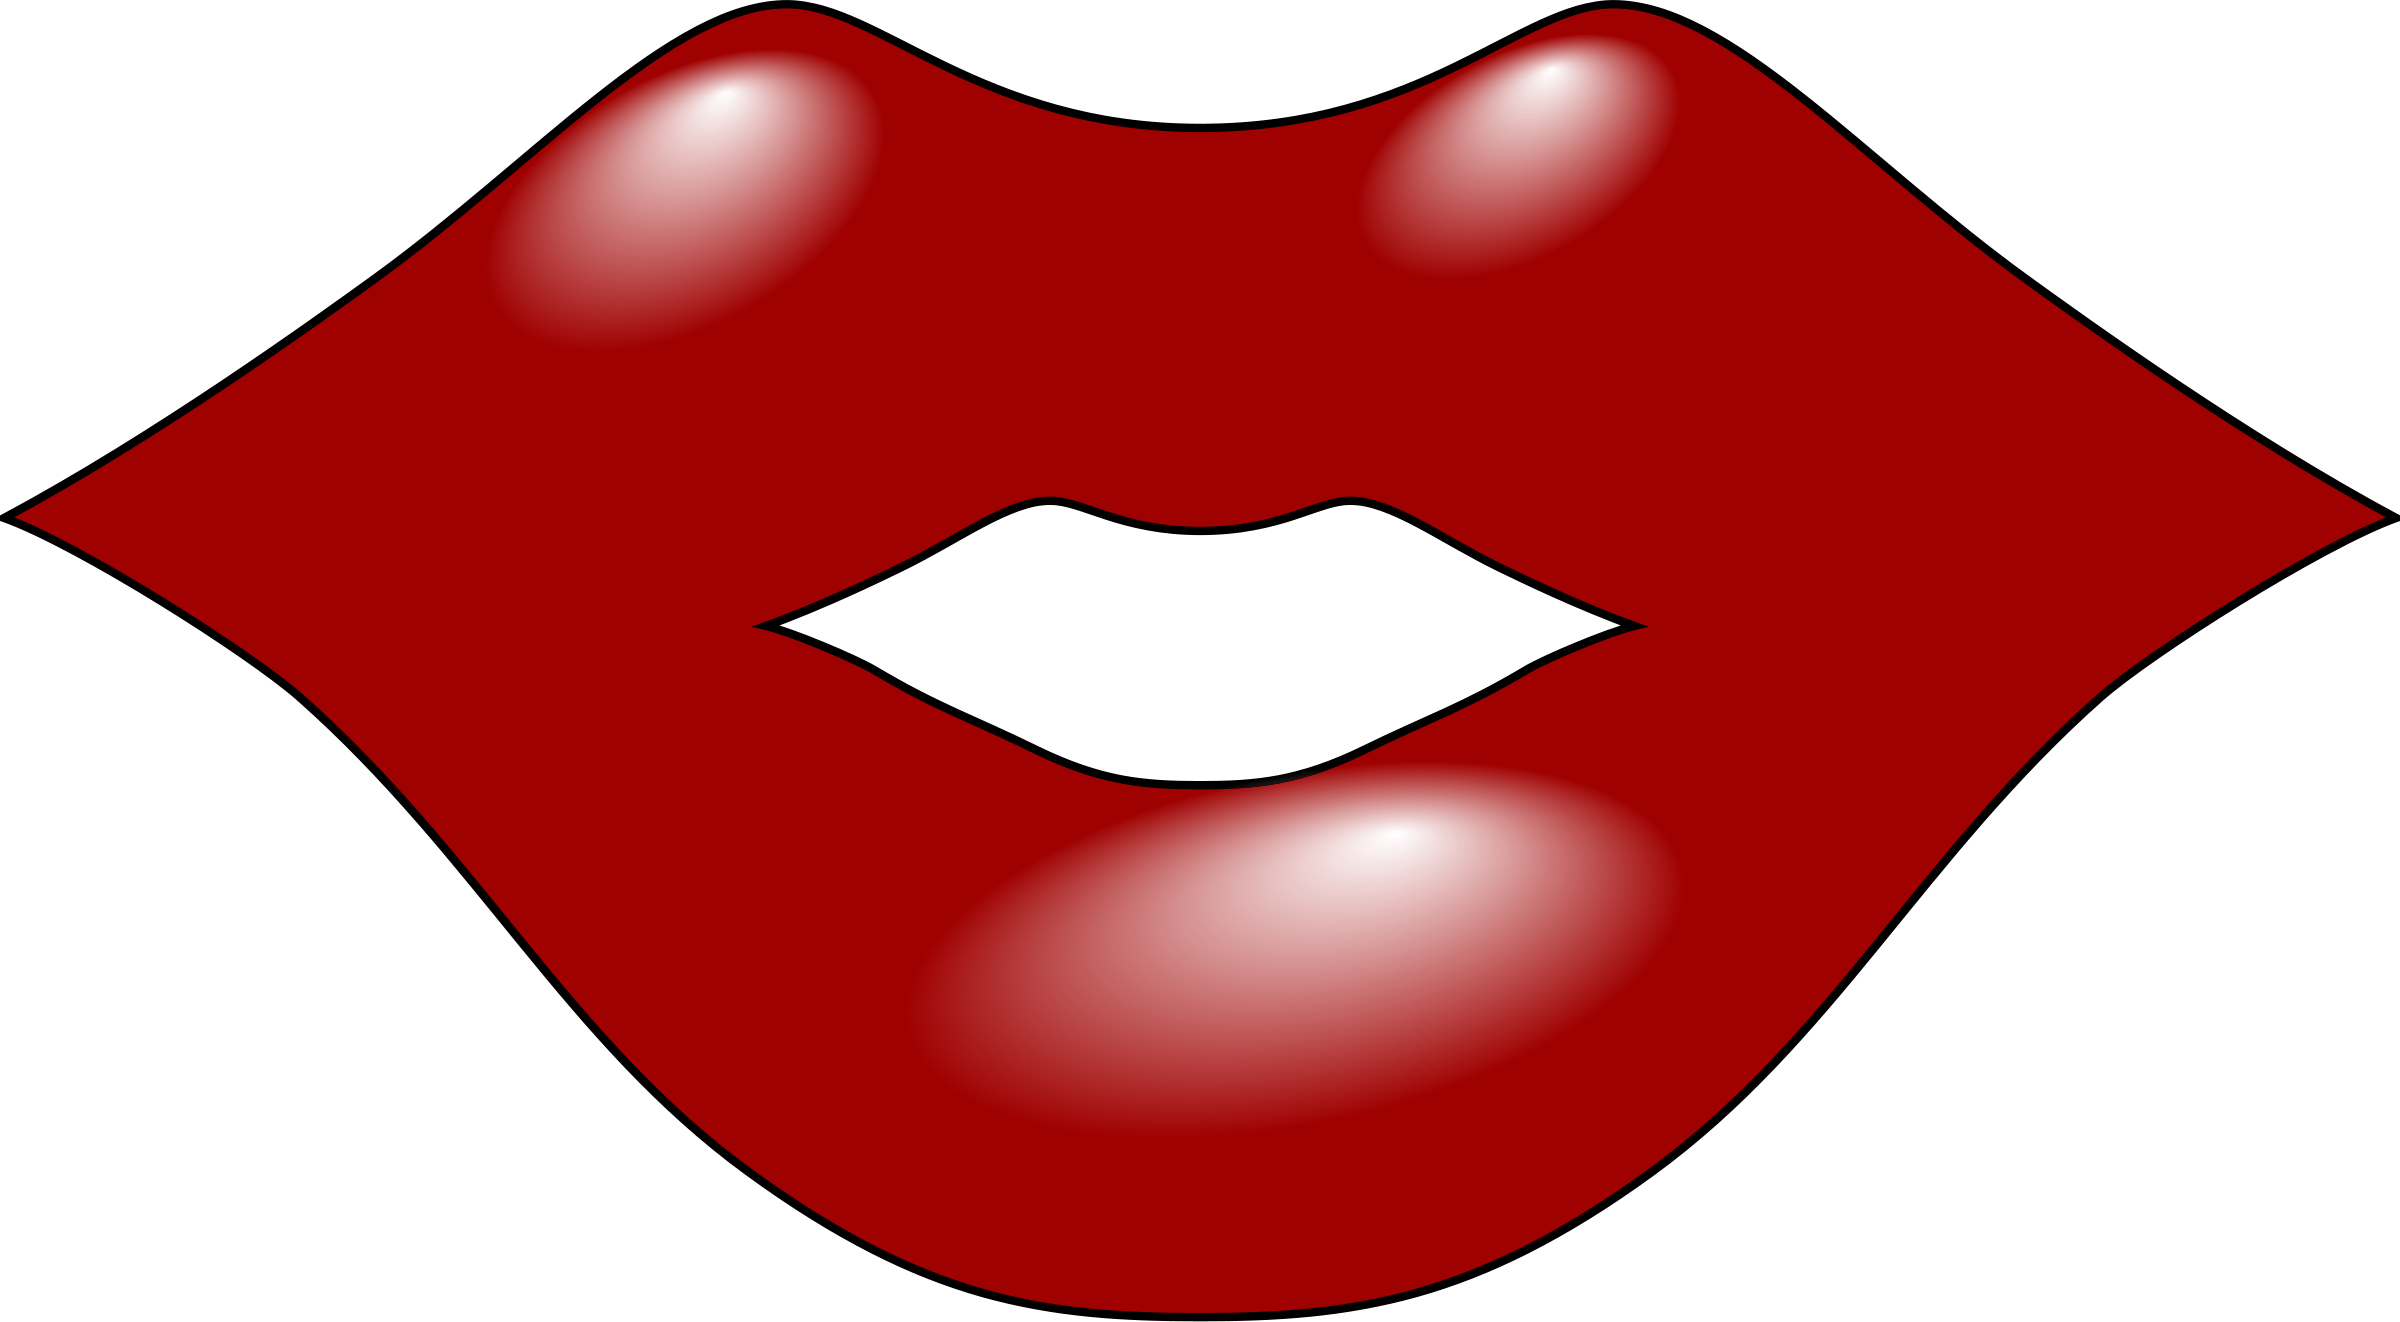 Red Lip and Toungue Logo - Free Red Lips Clipart, Download Free Clip Art, Free Clip Art on ...